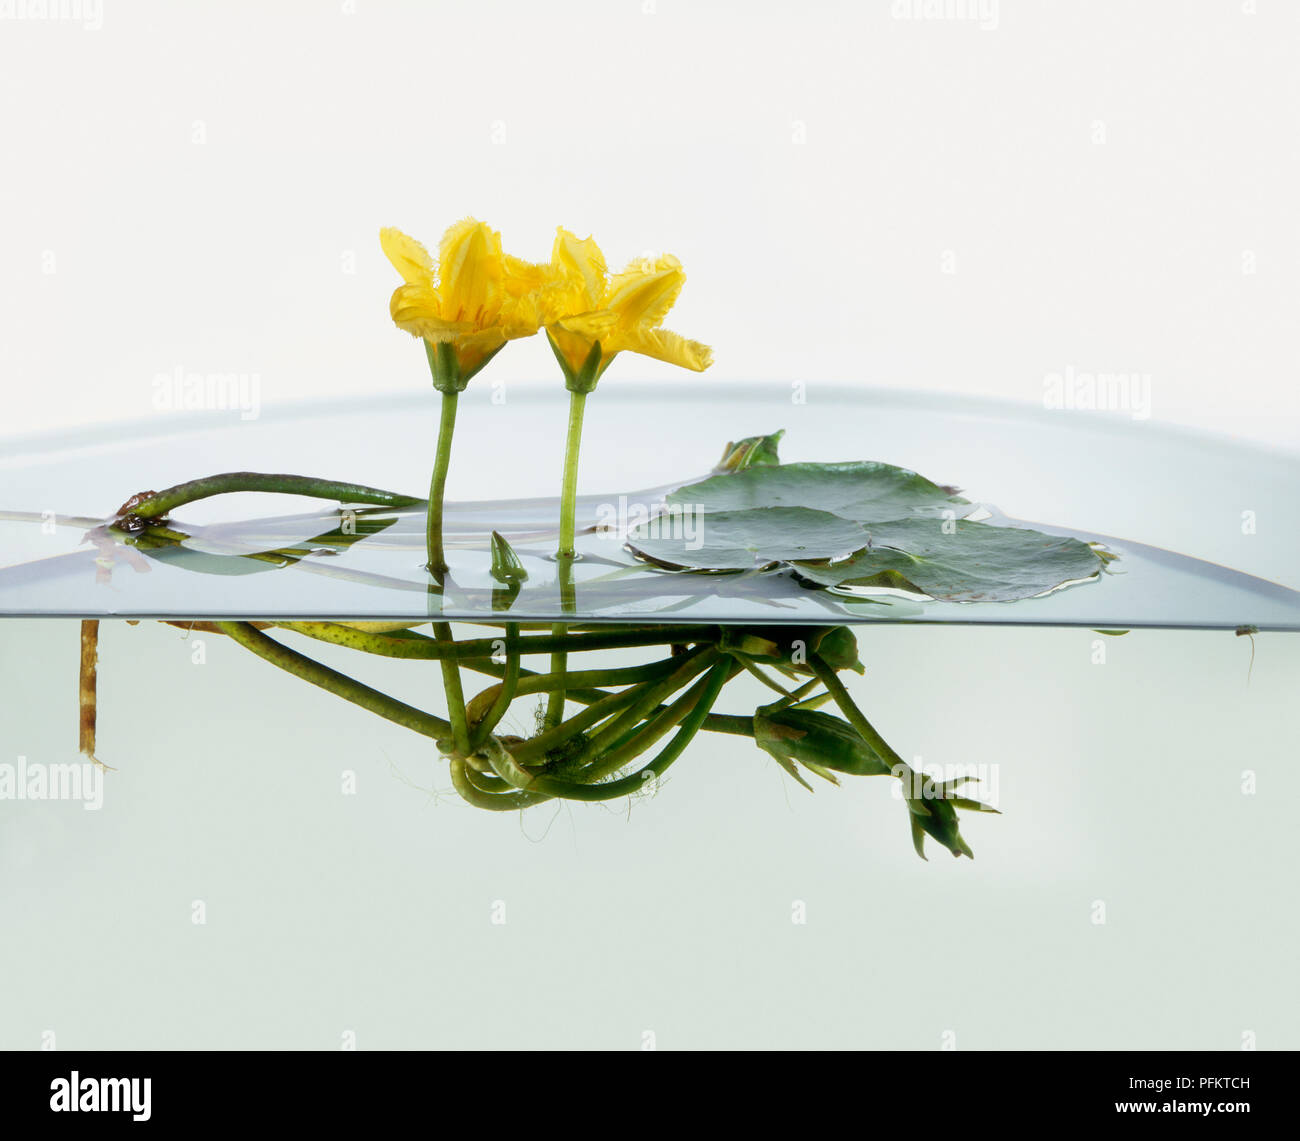 Yellow flowers from Nymphoides peltata (Fringed water lily) with underwater roots, close-up Stock Photo